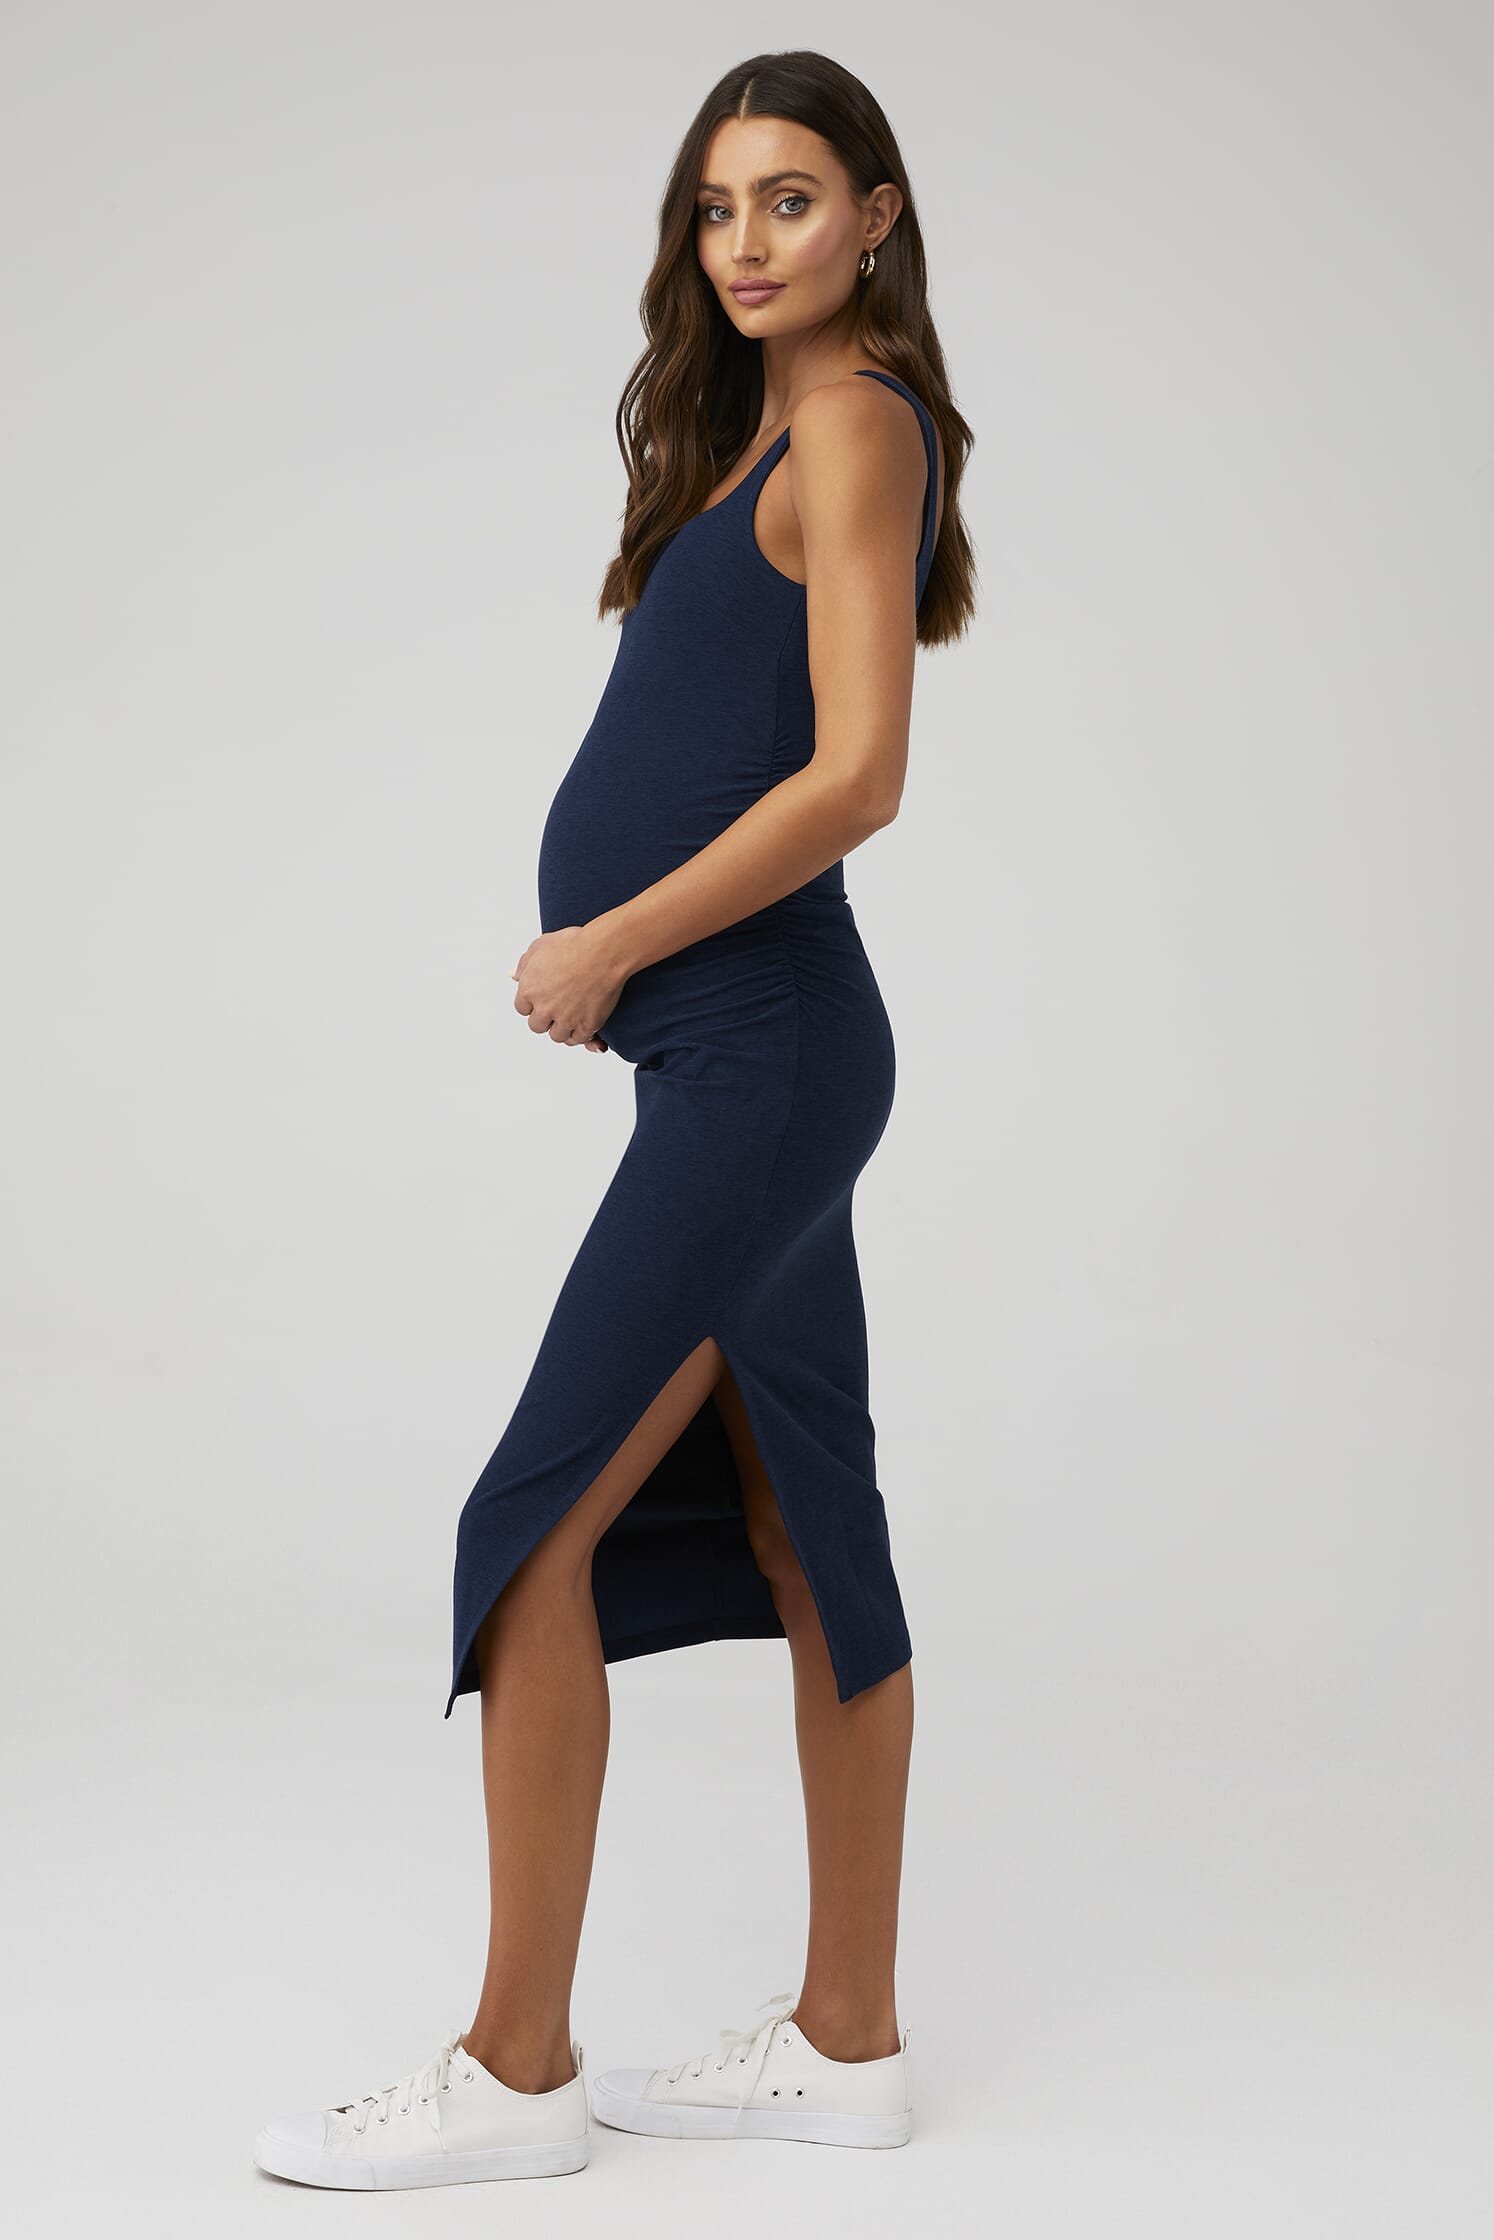 Beyond Yoga, Spacedye Icon Maternity Dress in Nocturnal Navy